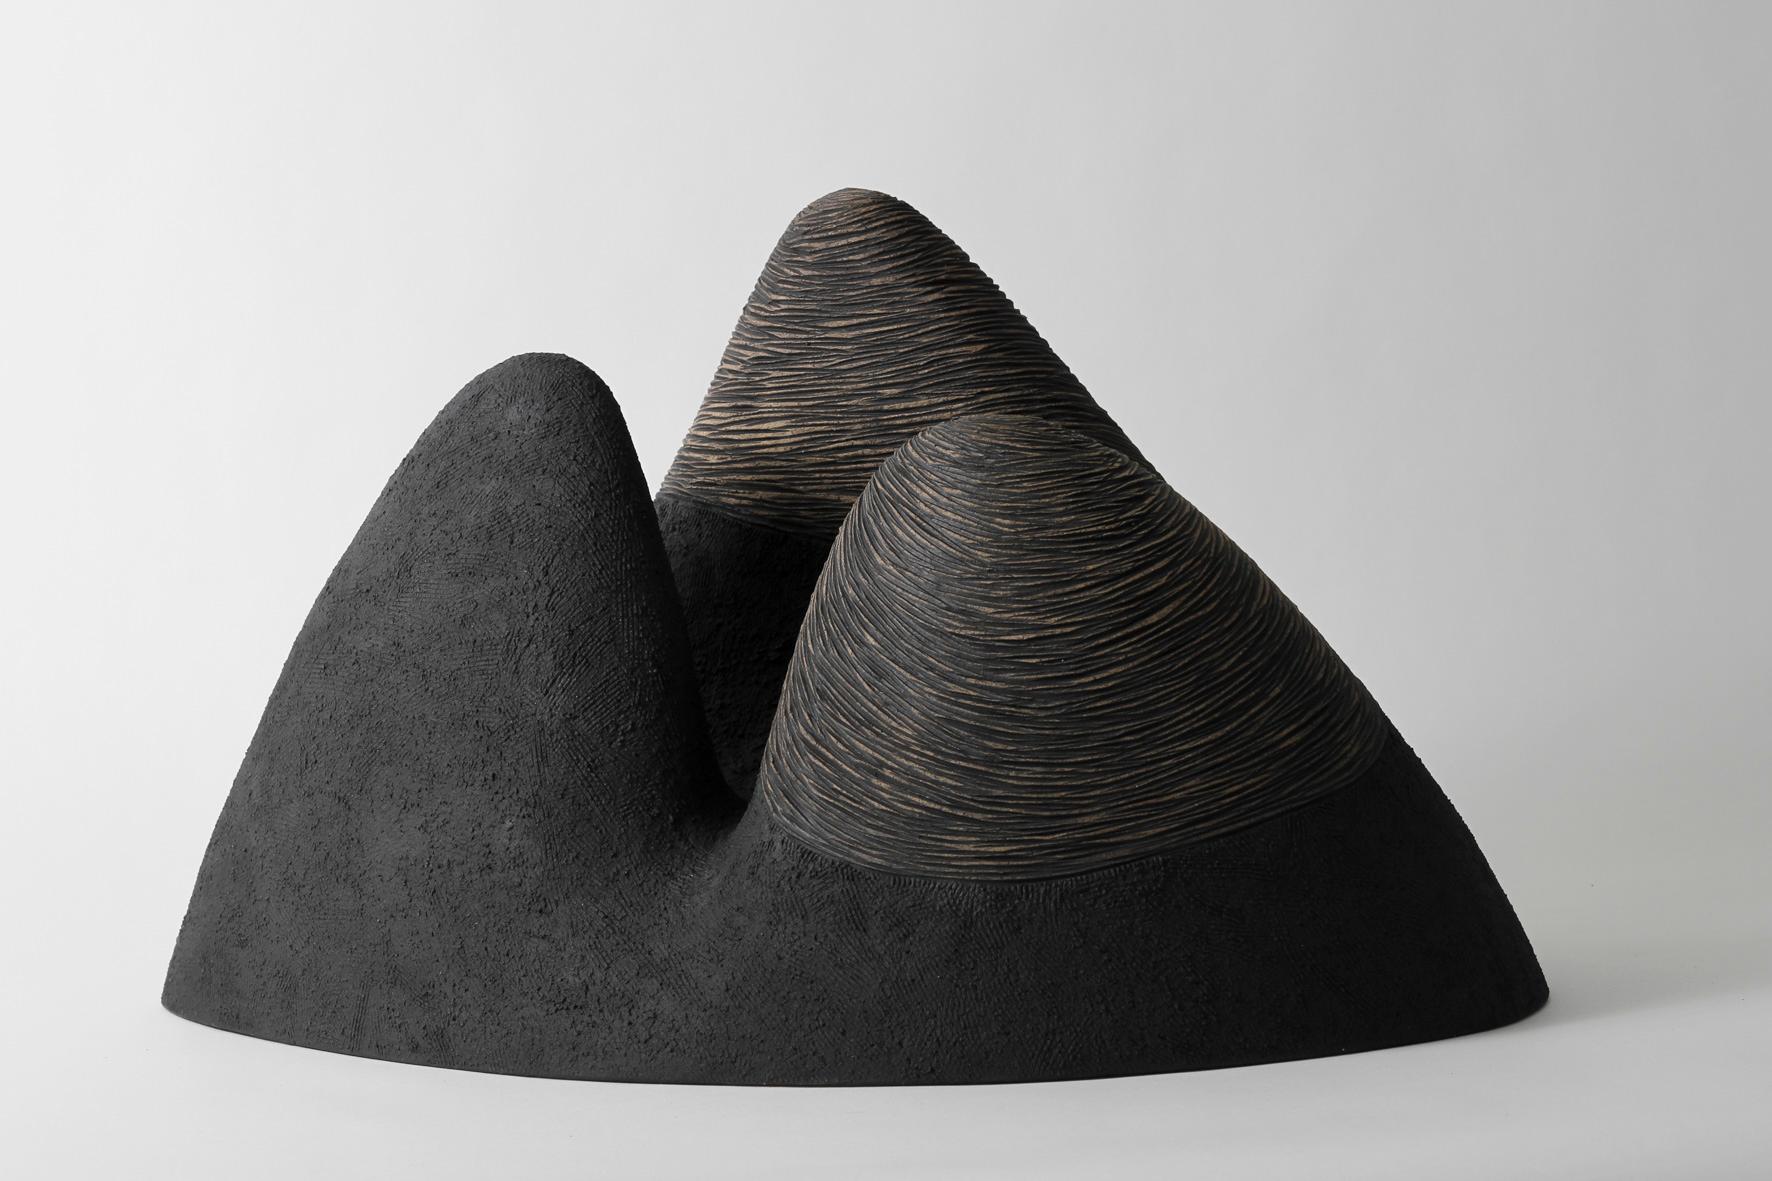 Original artwork by Robyn Campbell, Shadow Fall 11, is a hand-built ceramic sculpture, 28cm x 49cm x 27cm (d), 2023.

Simplicity, line, material, surface, and form are the focus of Robyn Campbell’s art practice. She uses various mediums including